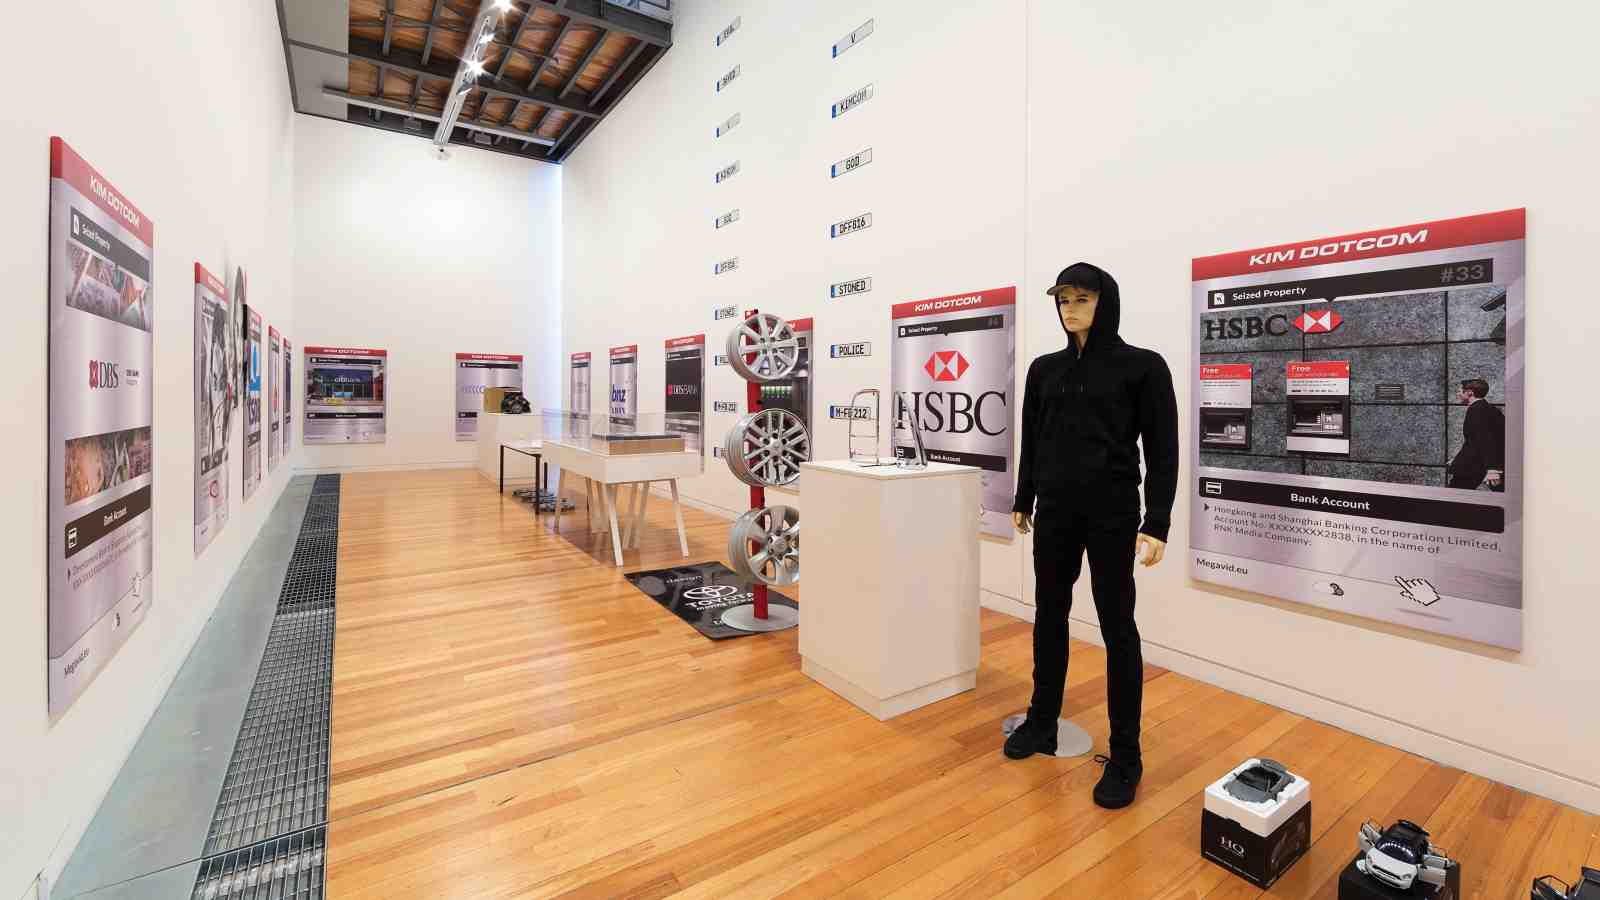 Simon Denny, The Personal Effects of Kim Dotcom 2014, installation view at the Adam Art Gallery, Victoria University of Wellington